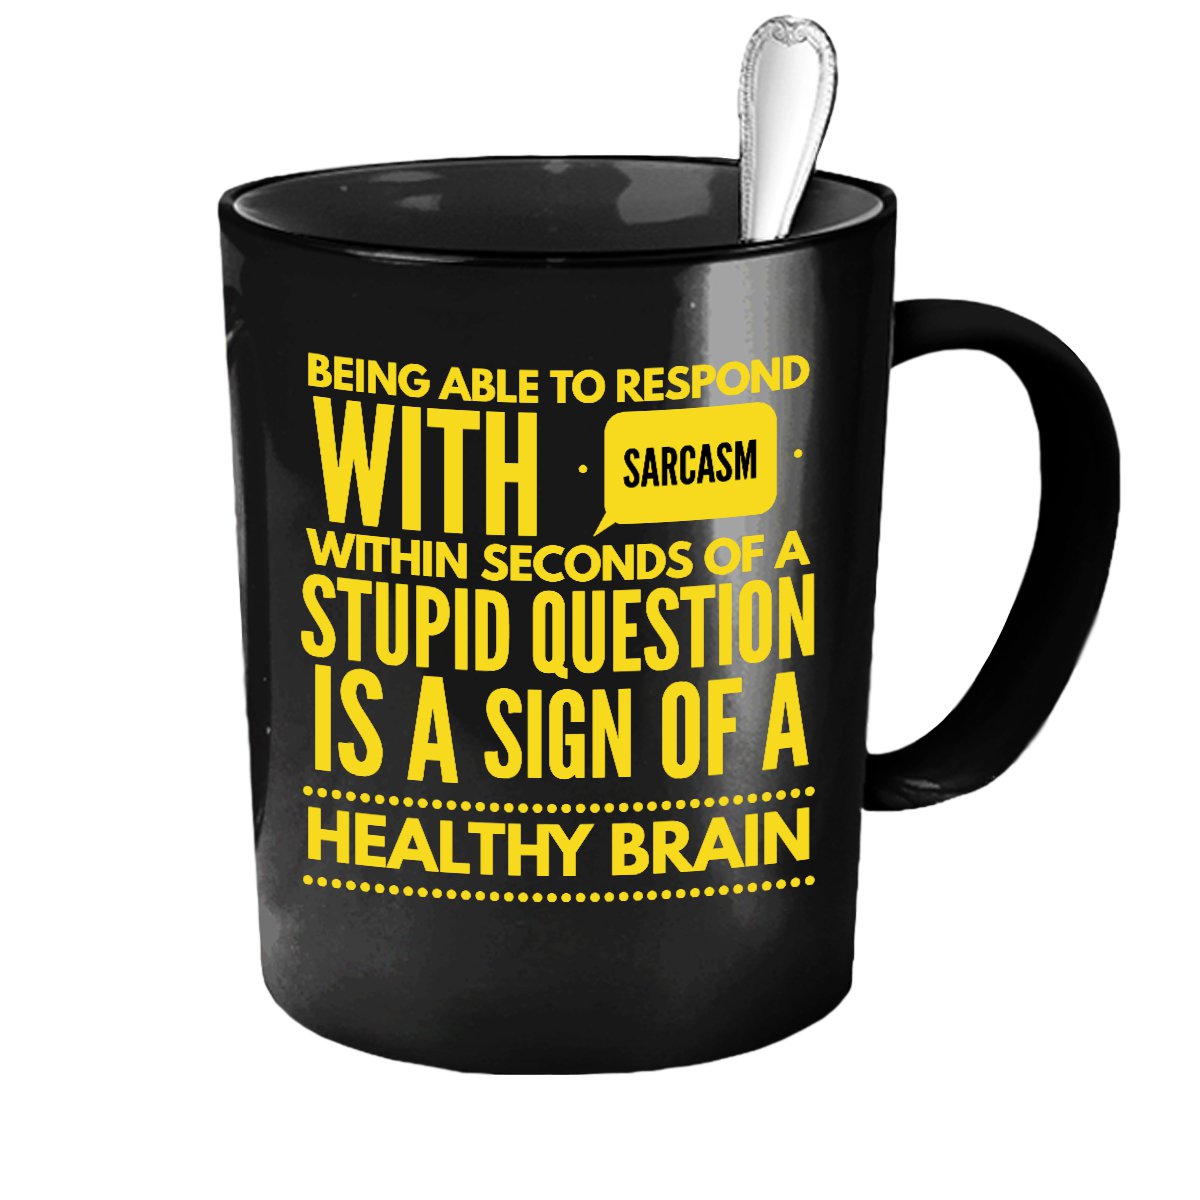 Funny Ceramic Coffee Mug Respond With Sarcasm Cute Large Cup Black Best T For Men Women